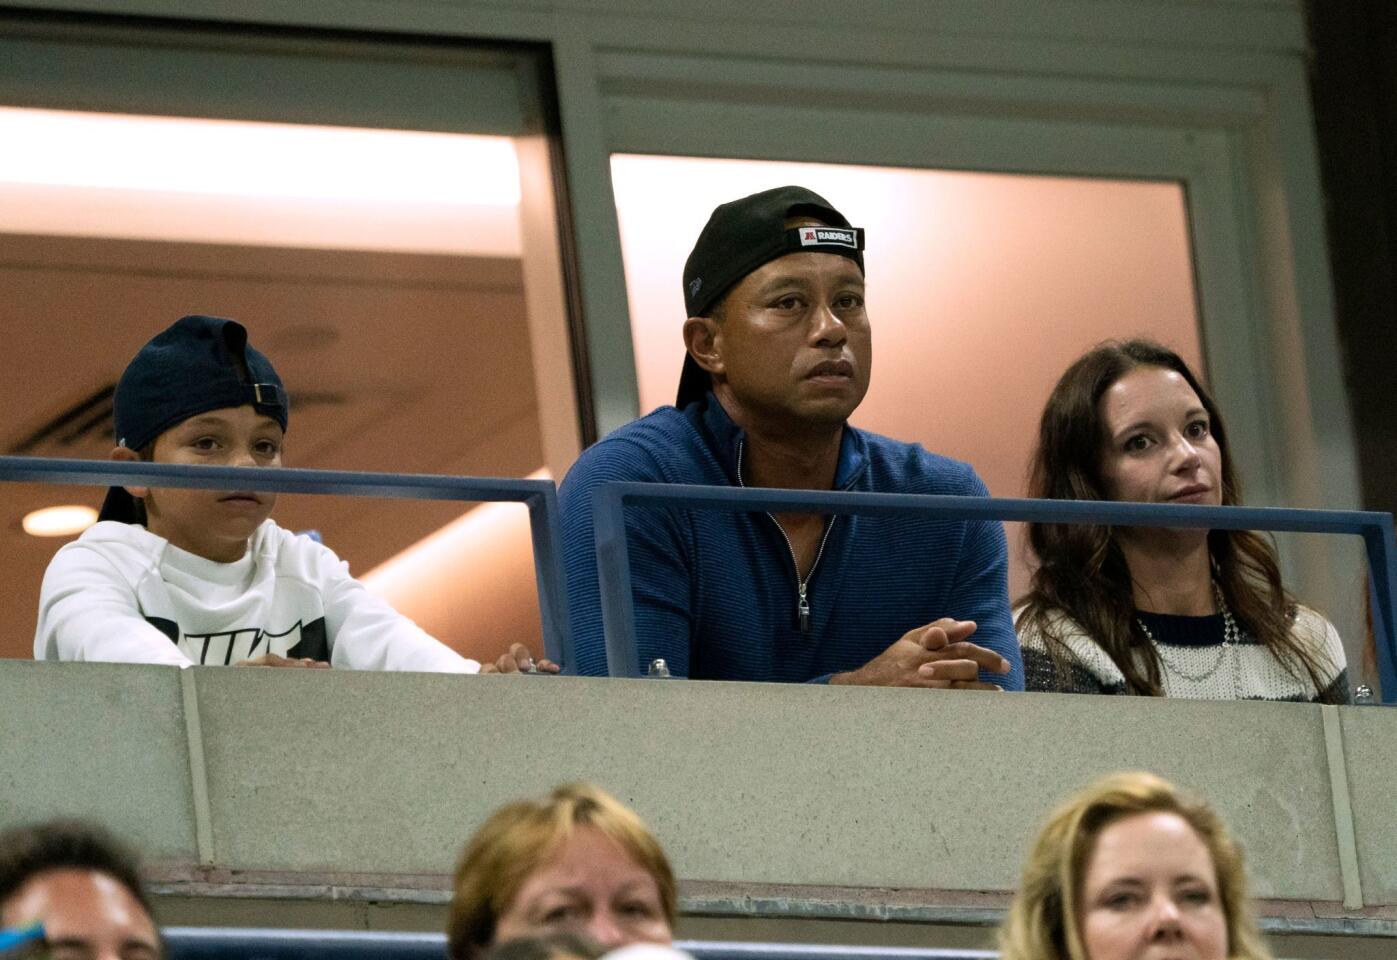 U.S. golfer Tiger Woods watches the match between Rafael Nadal of Spain and Marin Cilic of Croatia during their Round Four Men's Singles match at the 2019 US Open at the USTA Billie Jean King National Tennis Center in New York on Sept. 2, 2019.